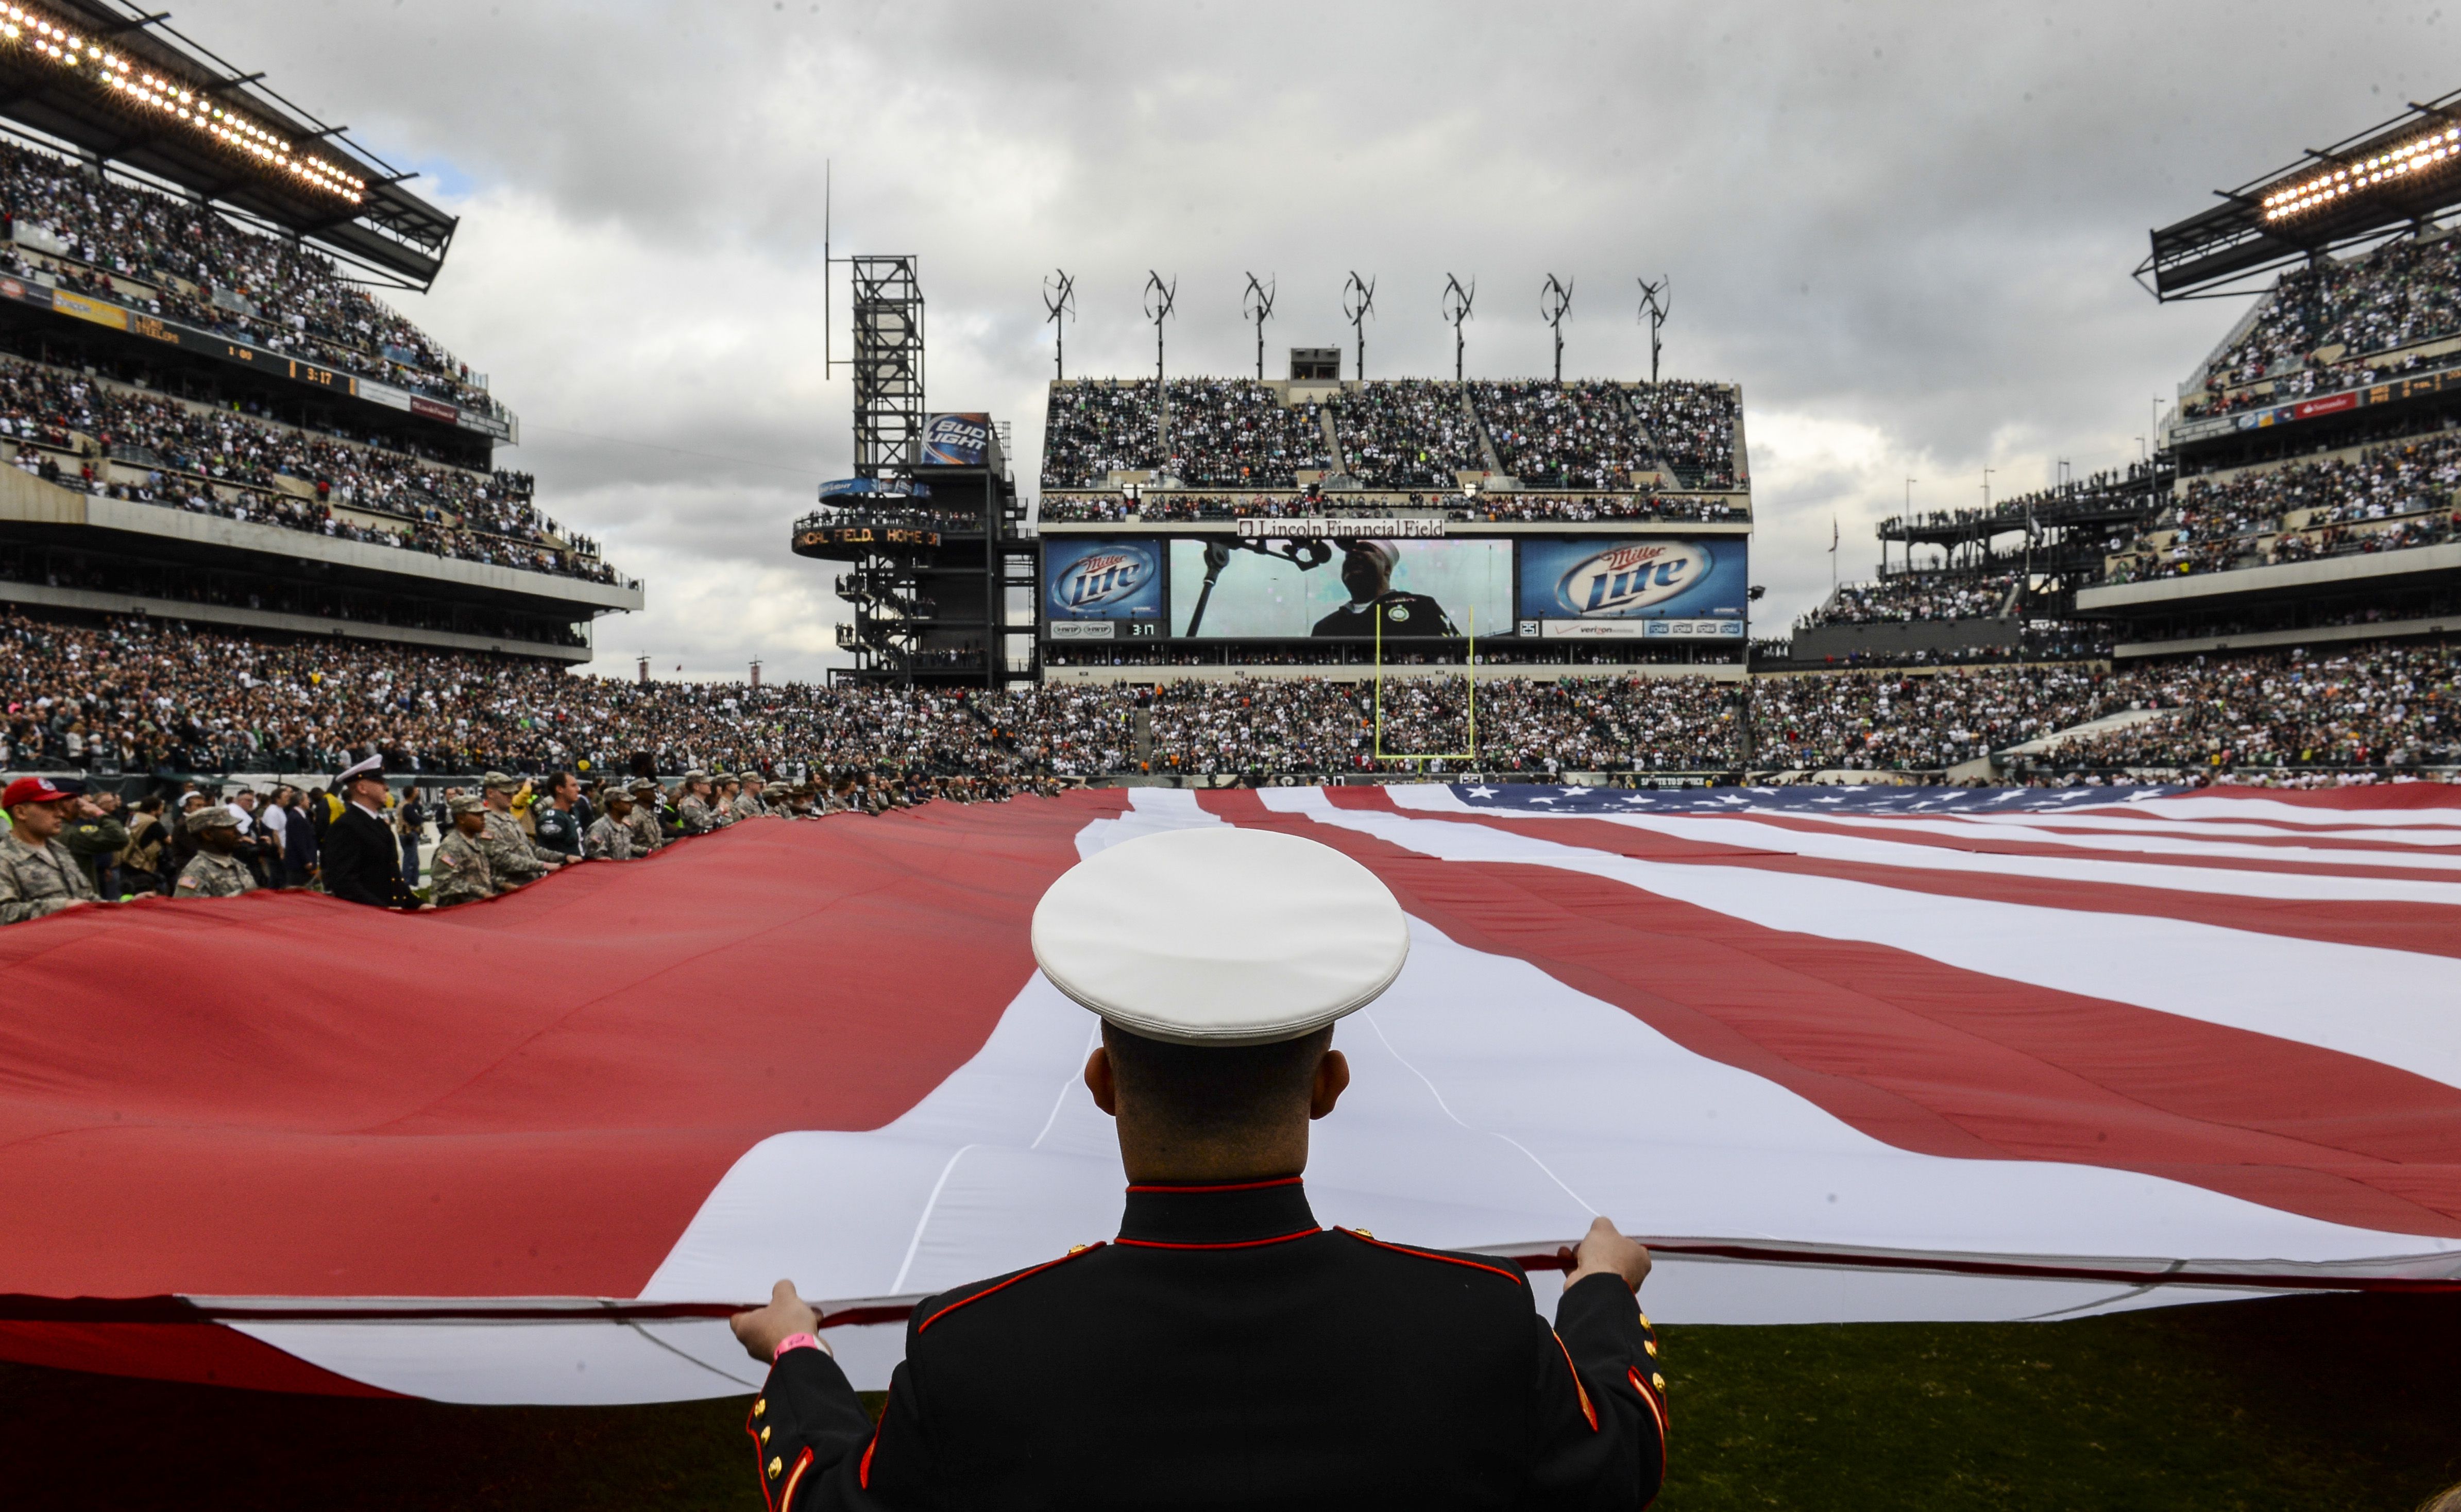 For Decades The Nfl Wrapped Itself In The Flag Now That S Made Business Uneasy The Washington Post Magical, meaningful itemsyou can't find anywhere else. the washington post